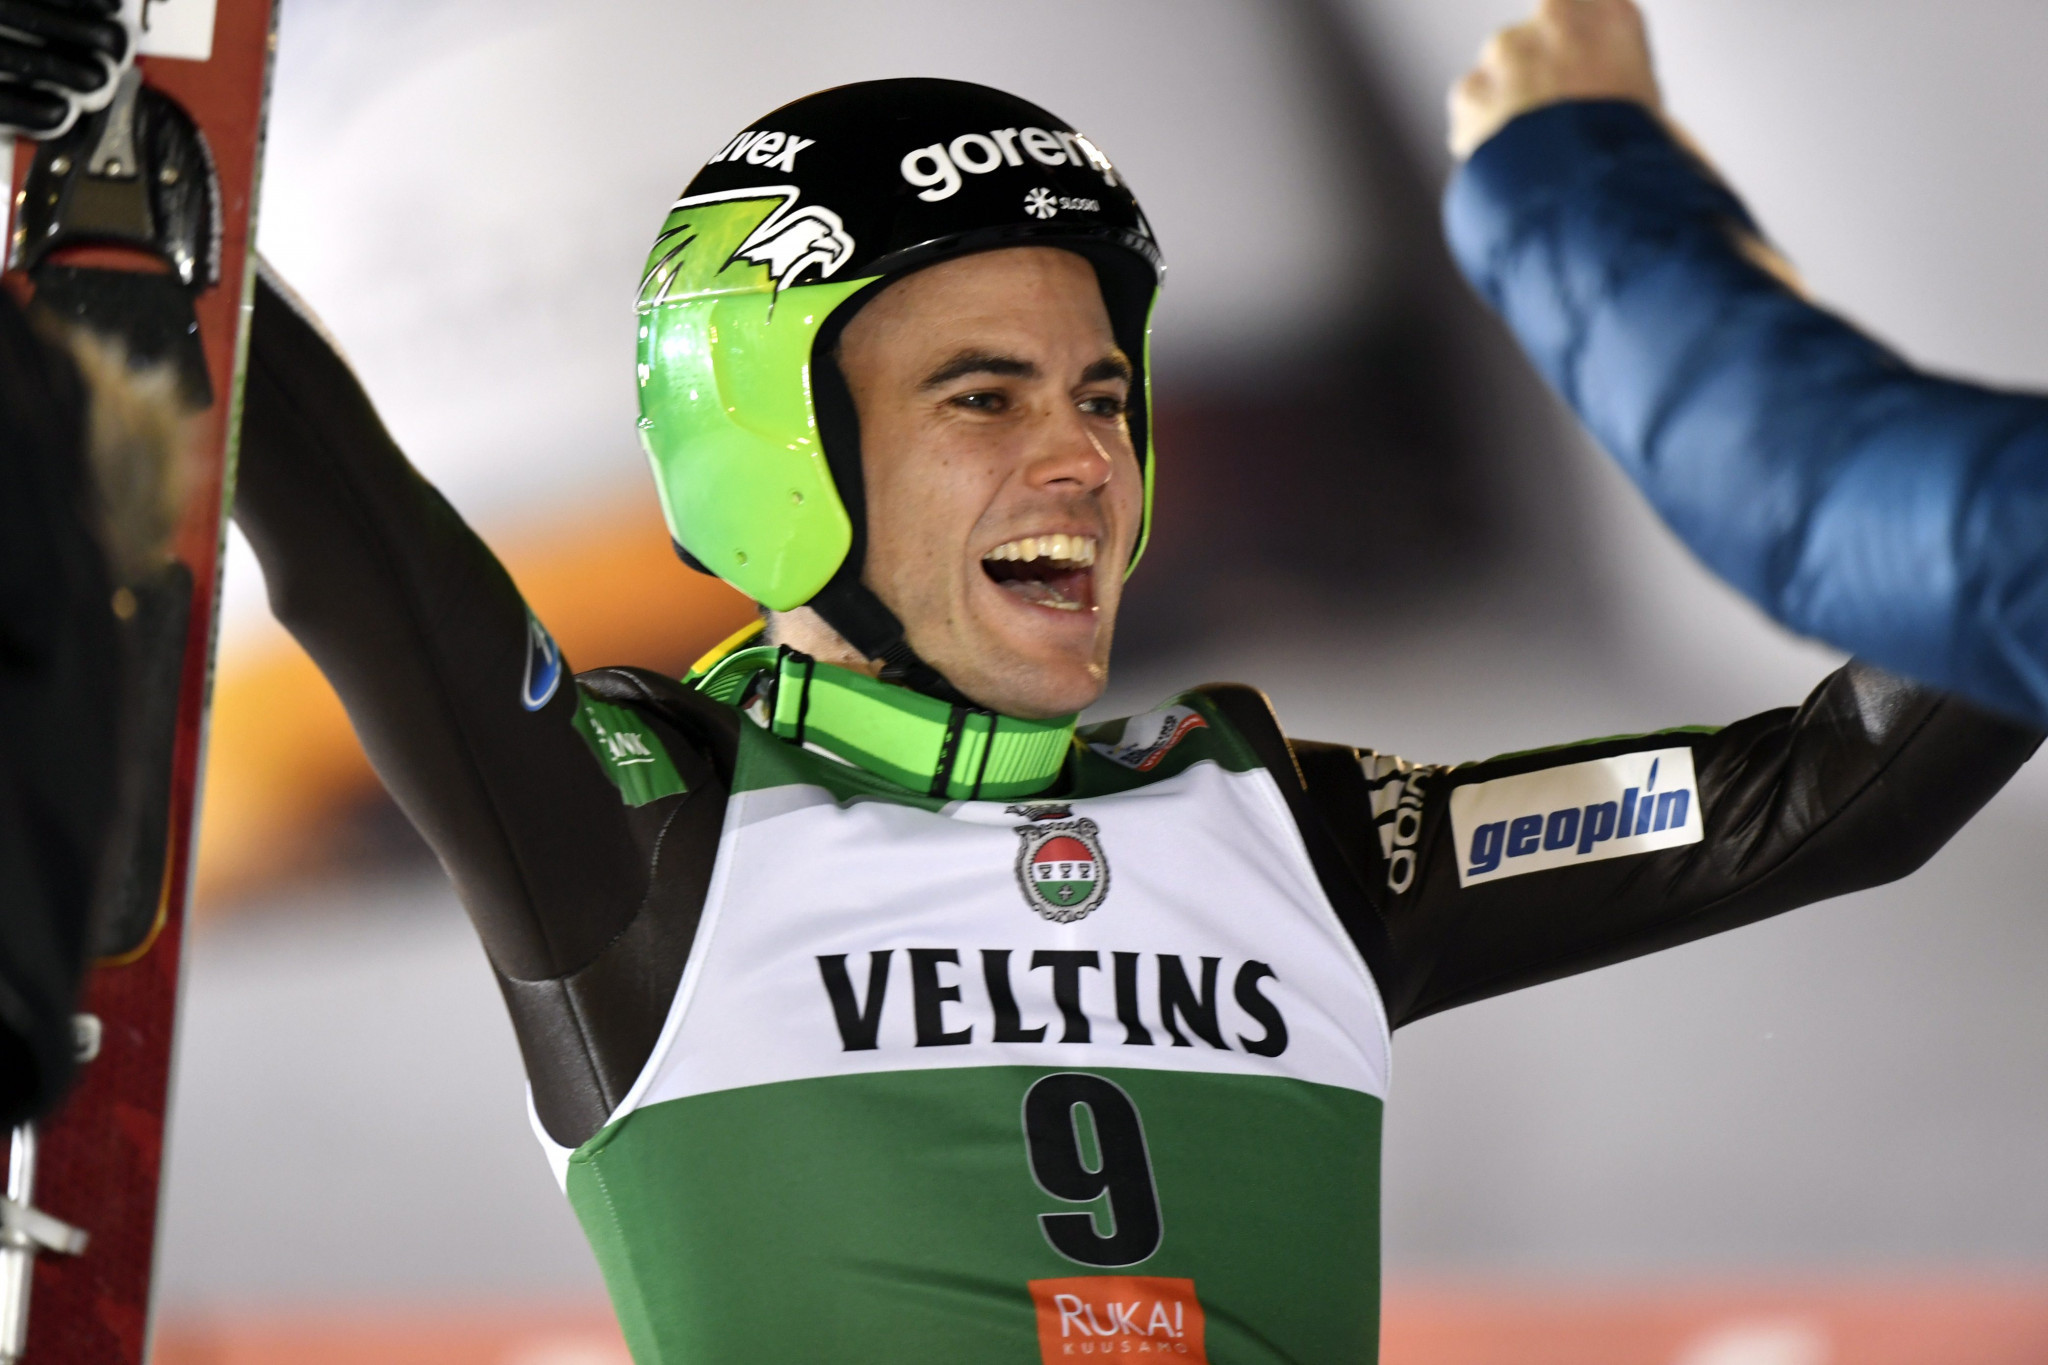 Jernej Damjan recorded a surprise victory at the FIS Ski Jumping World Cup in Ruka ©Getty Images